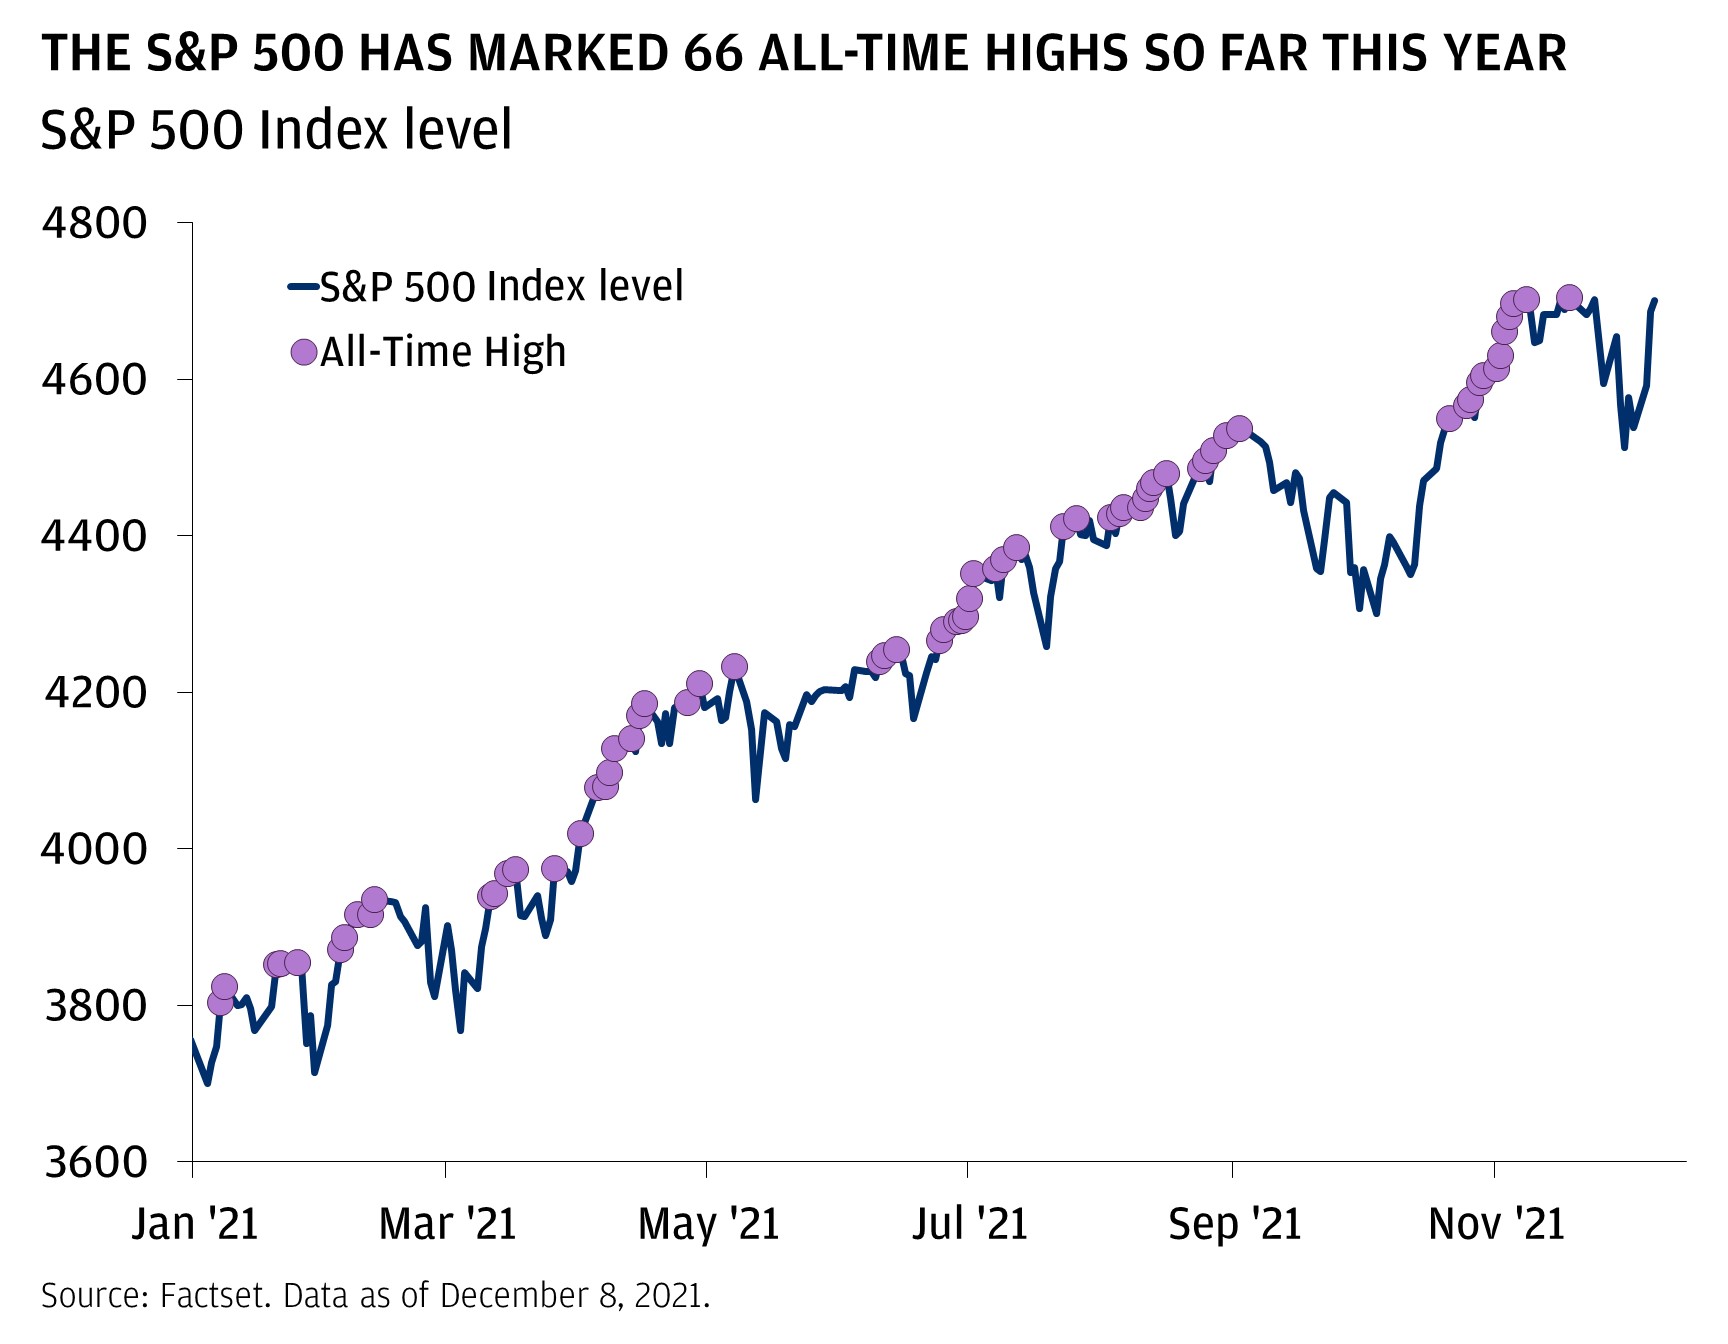 The S&P 500 has marked 66 all-time highs so far this year 